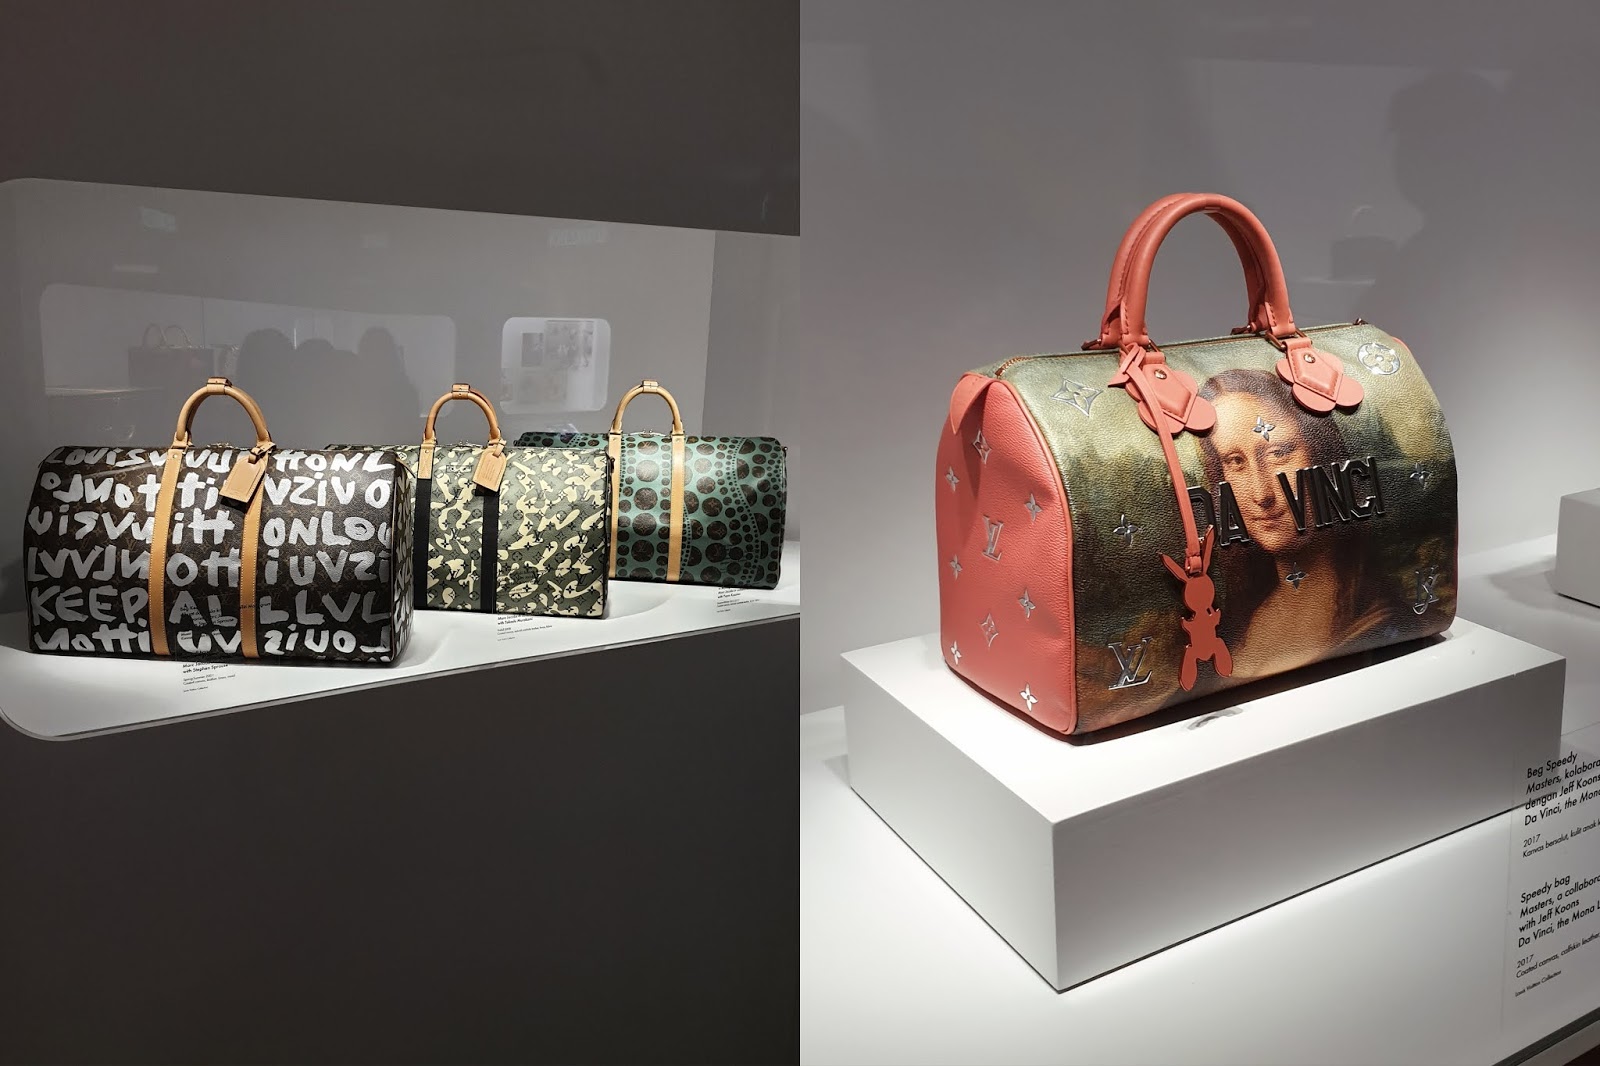 Why Louis Vuitton's Time Capsule exhibition in Suria KLCC is worth